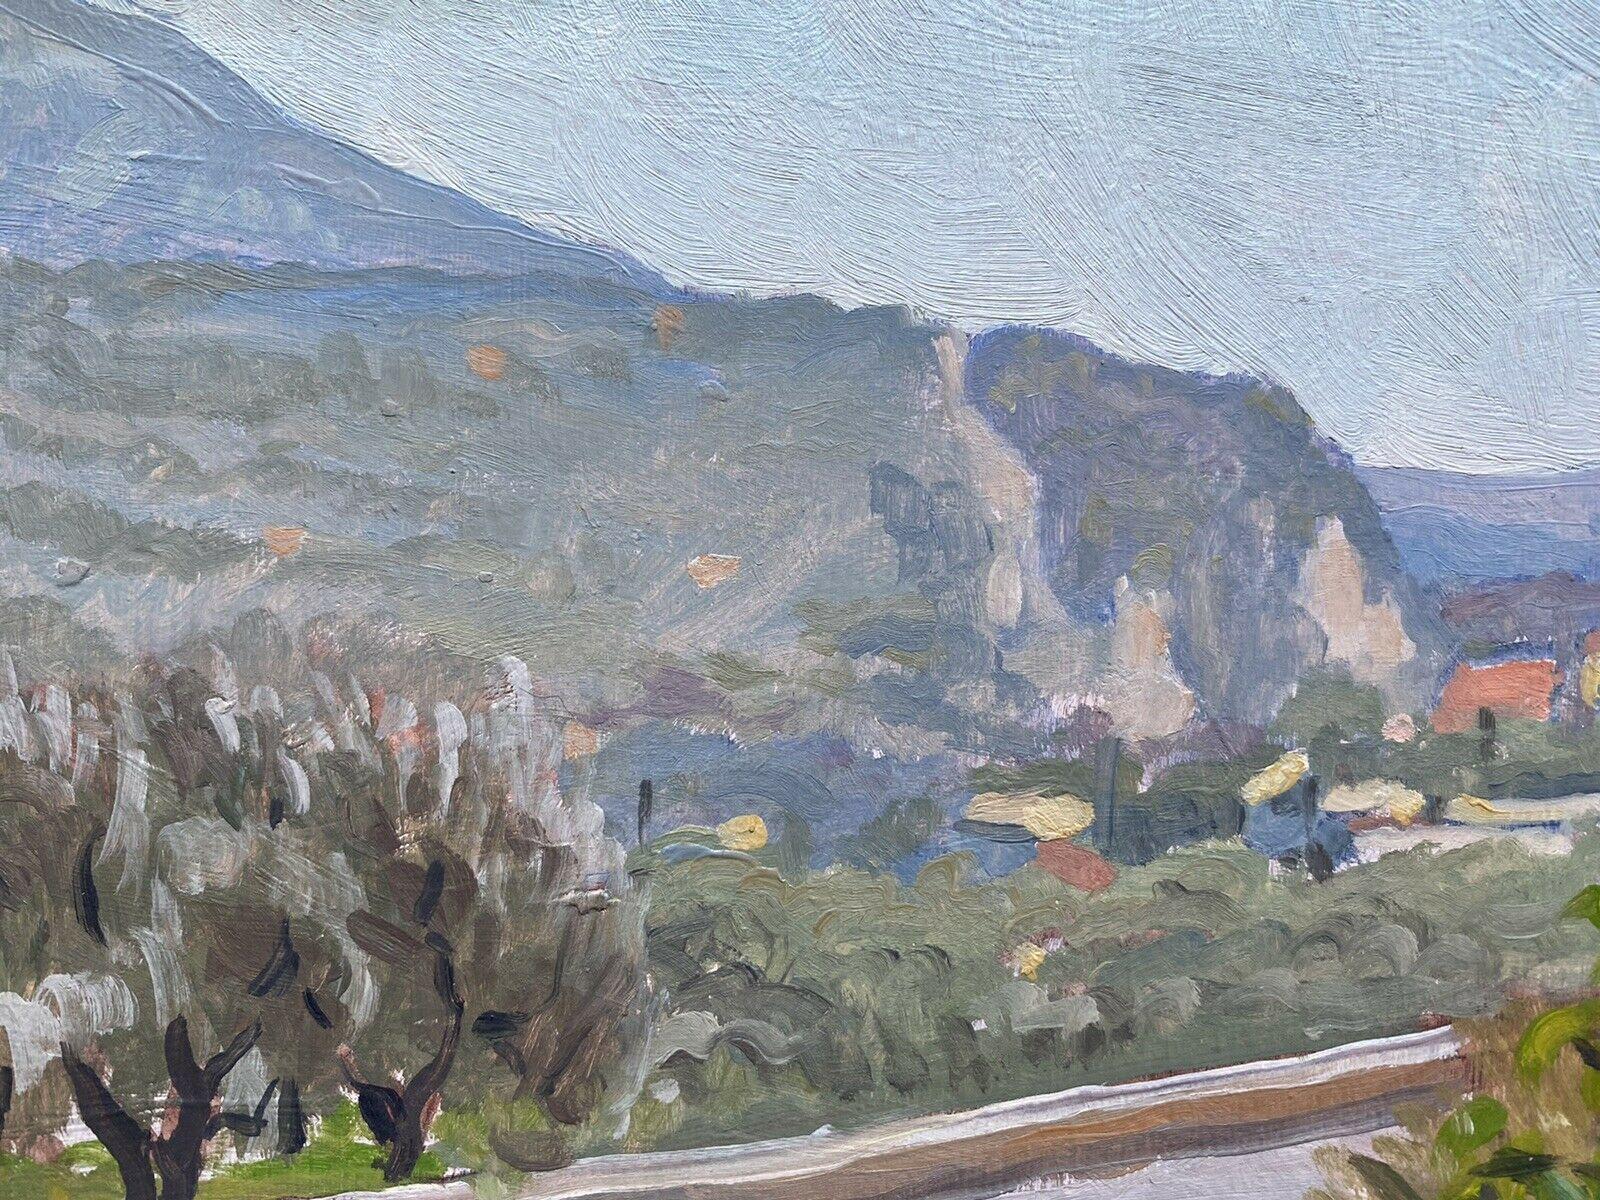 Artist/ School: Rene Hutet (French, 1907-1994)

Title: The Winding Road, Provence

Medium:  oil painting on board

Size:  painting: 7.5 x 9.5 inches

Provenance: private collection, France

Condition: The painting is in good and pleasing condition.
